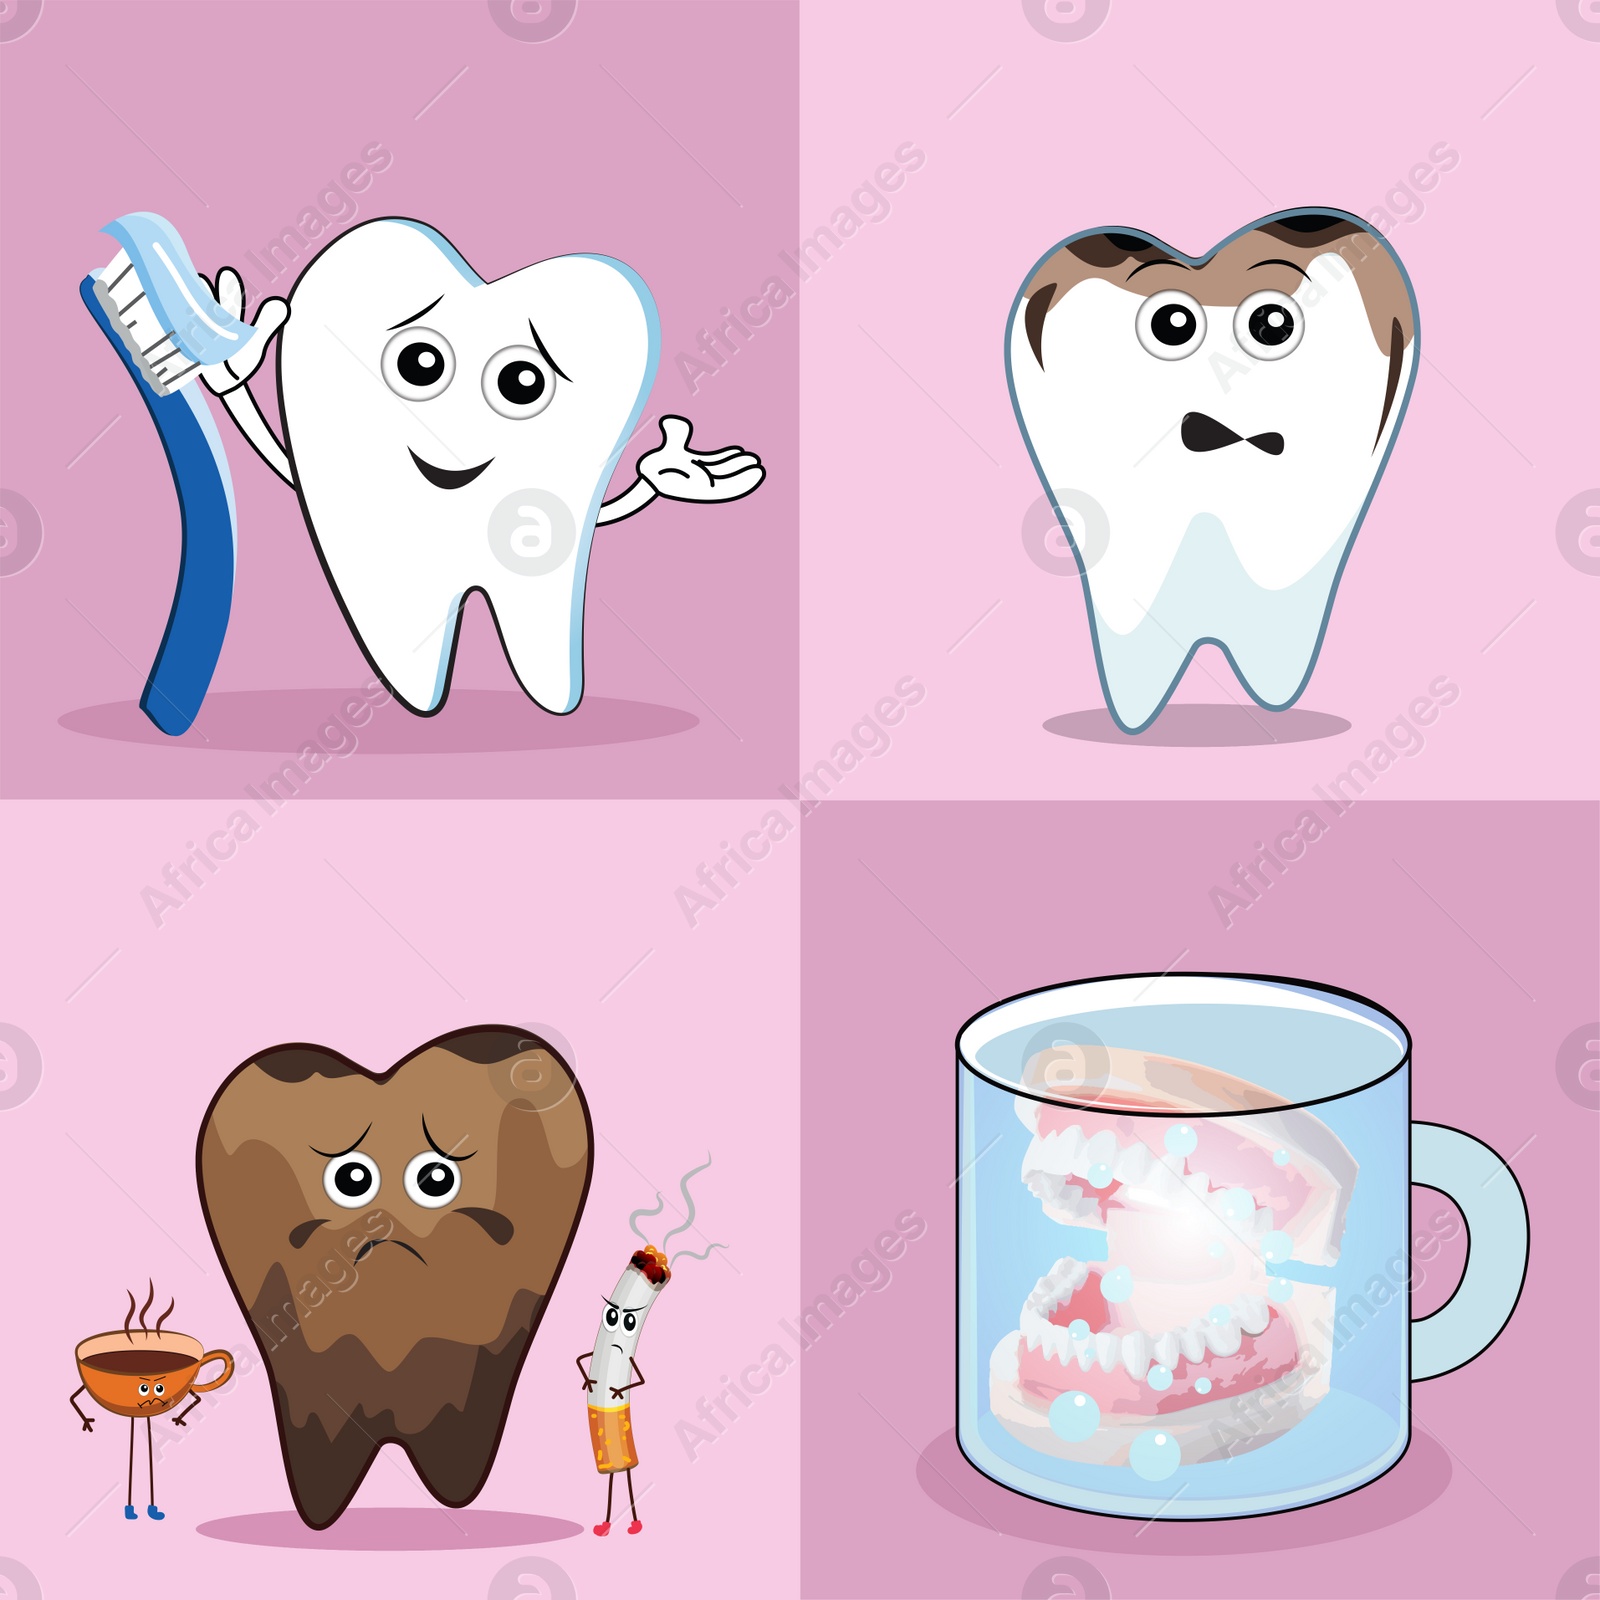 Illustration of Collage with healthy and unhealthy teeth on pink background, illustration. Dental care